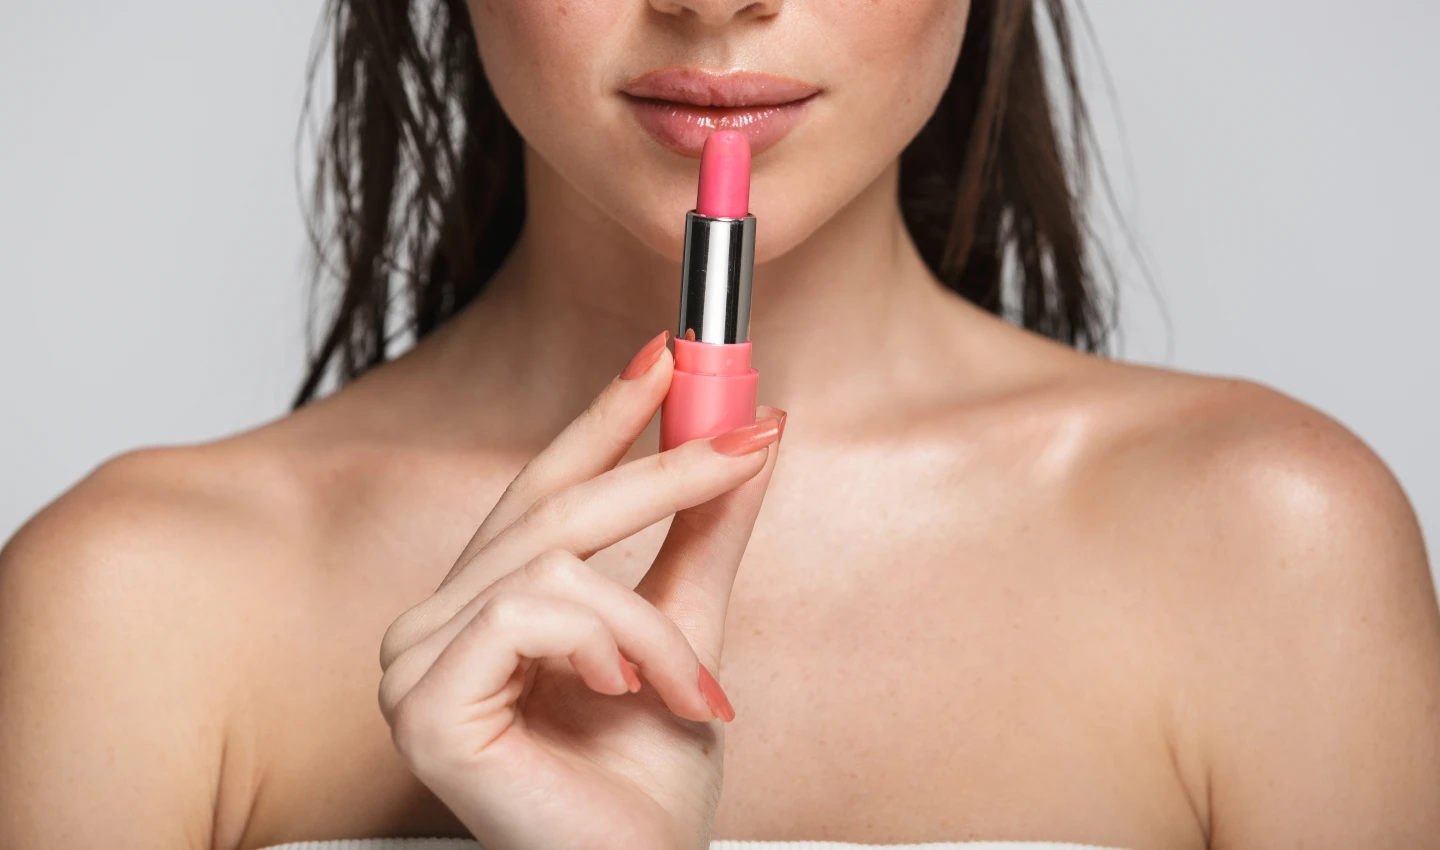 Hydrating Lipsticks: Beauty Half Face Portrait of an Attractive Sensual Young Woman with Wet Brunette Long Hair